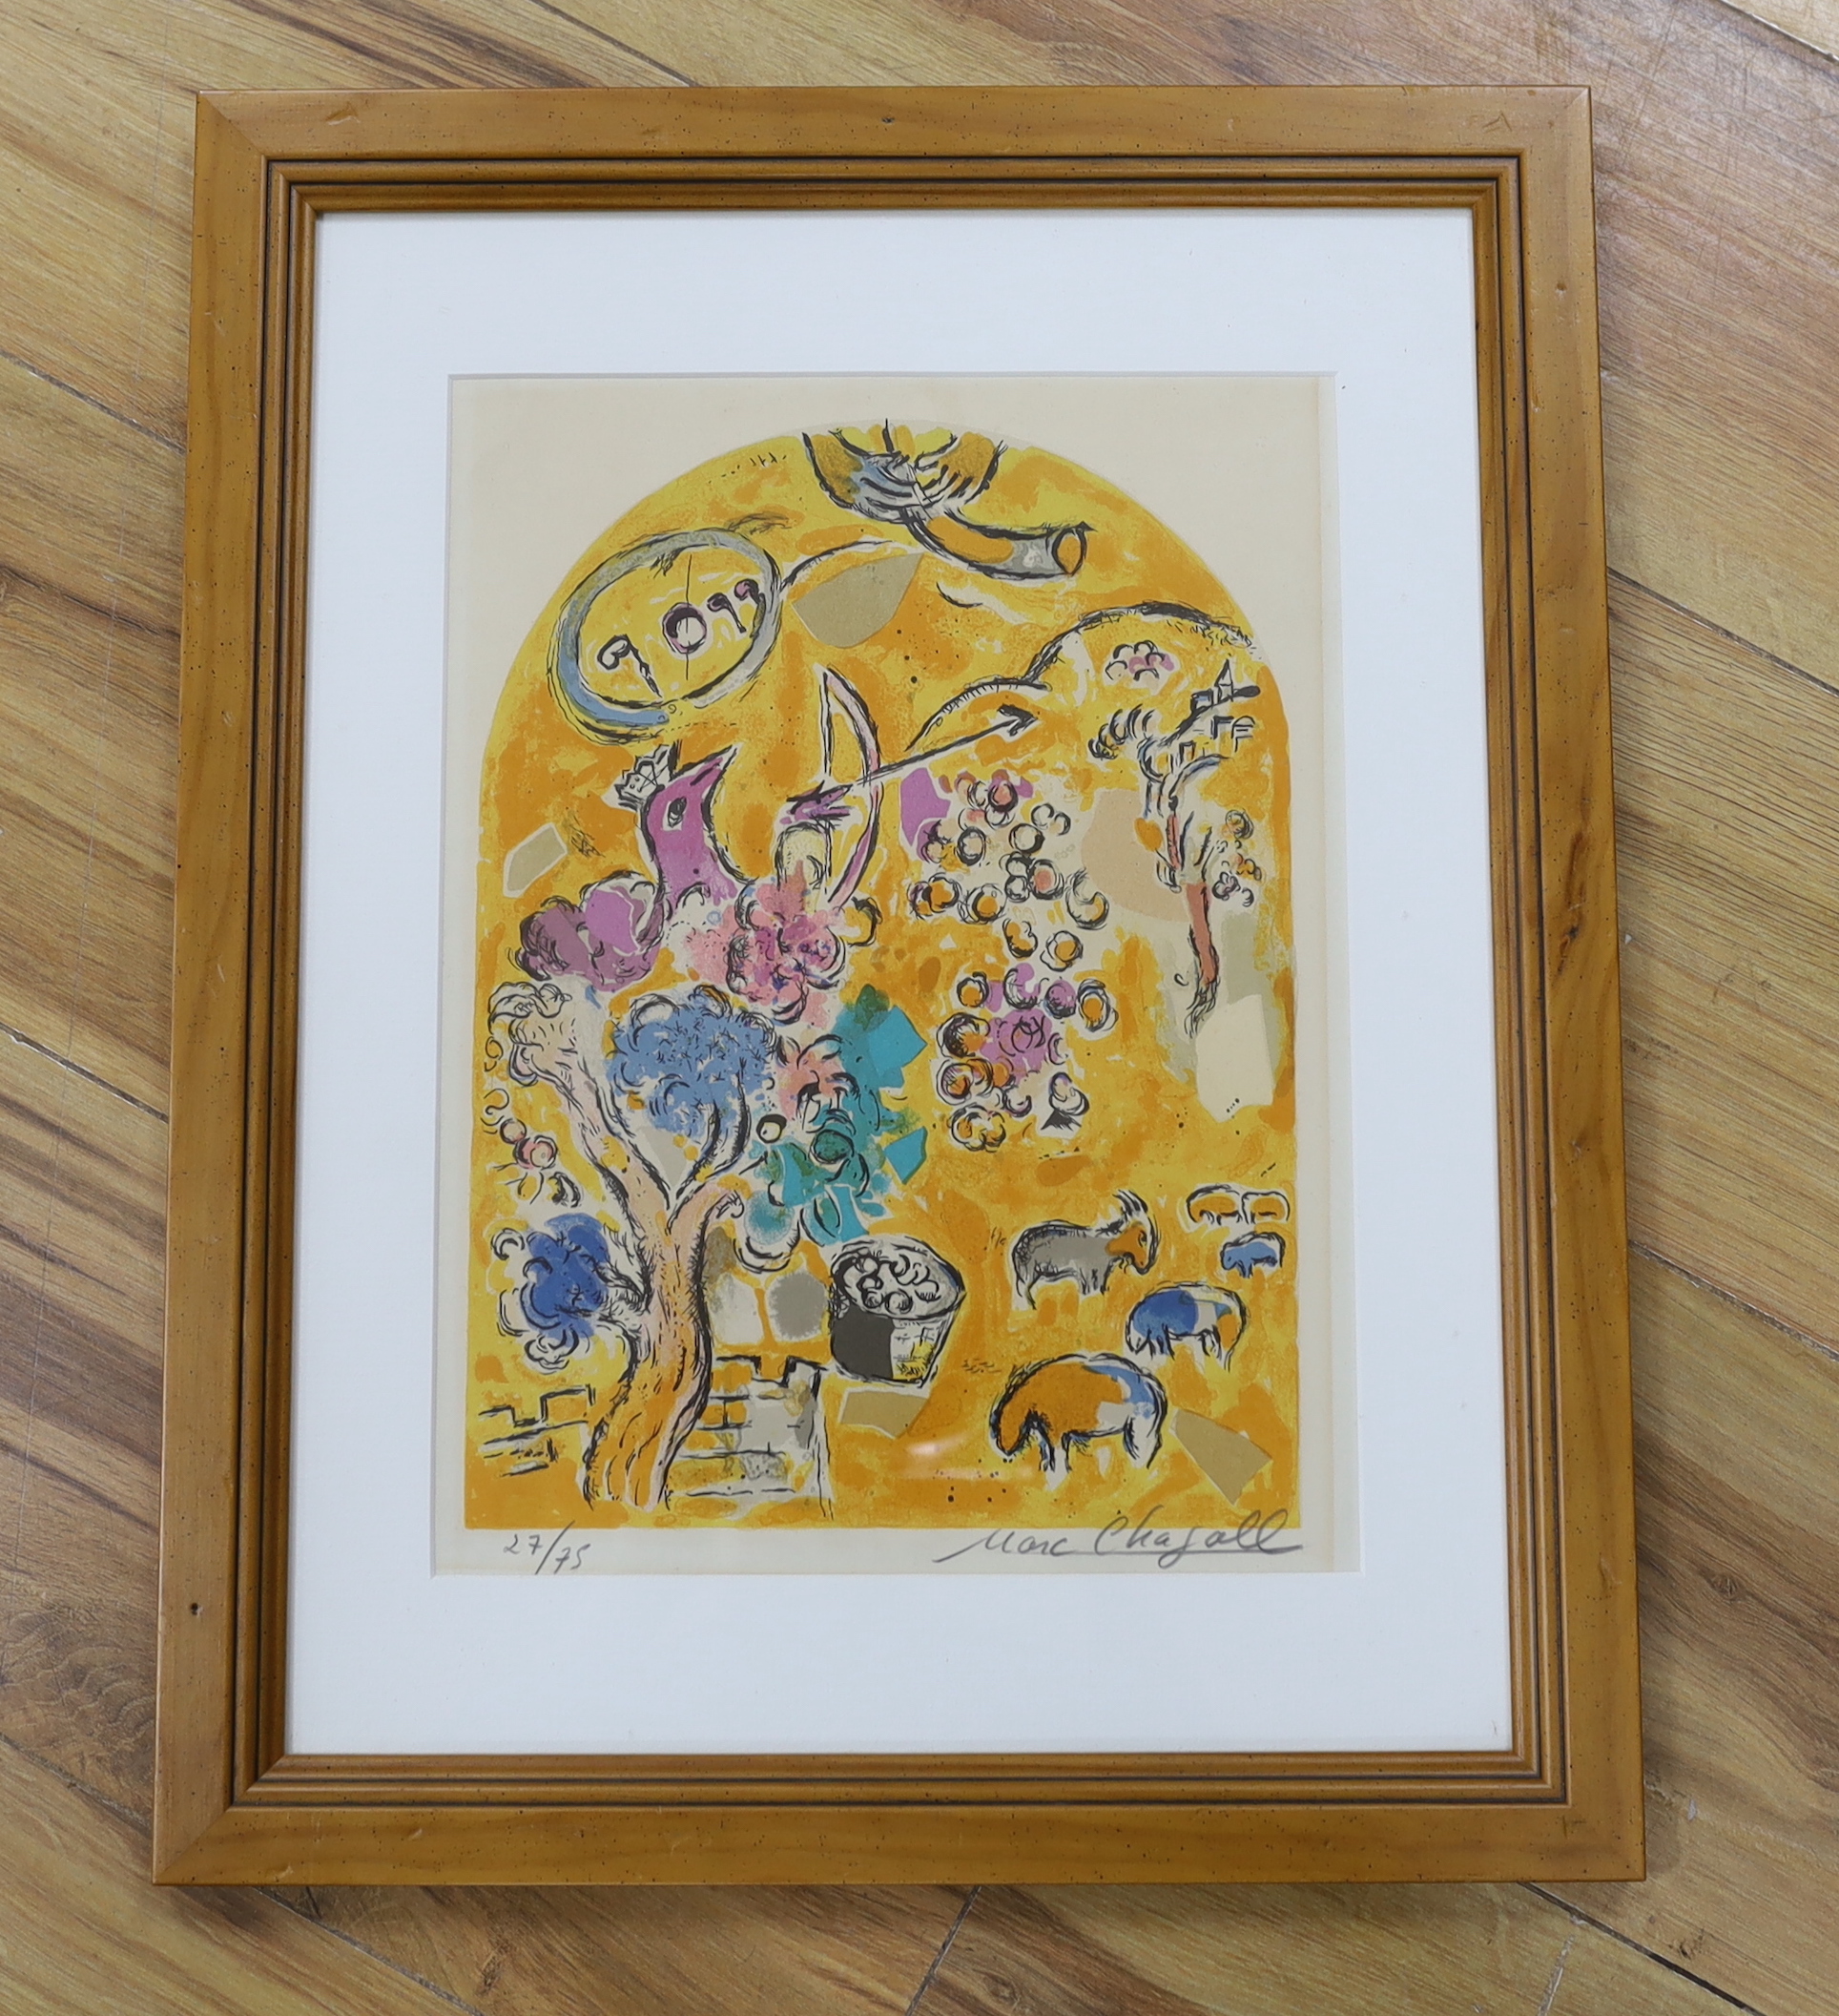 Marc Chagall (Russian/French, 1887-1985), colour lithograph, 'The Tribe for Joseph', signed in pencil, limited edition, 27/75, 31.5 x 23.5cm